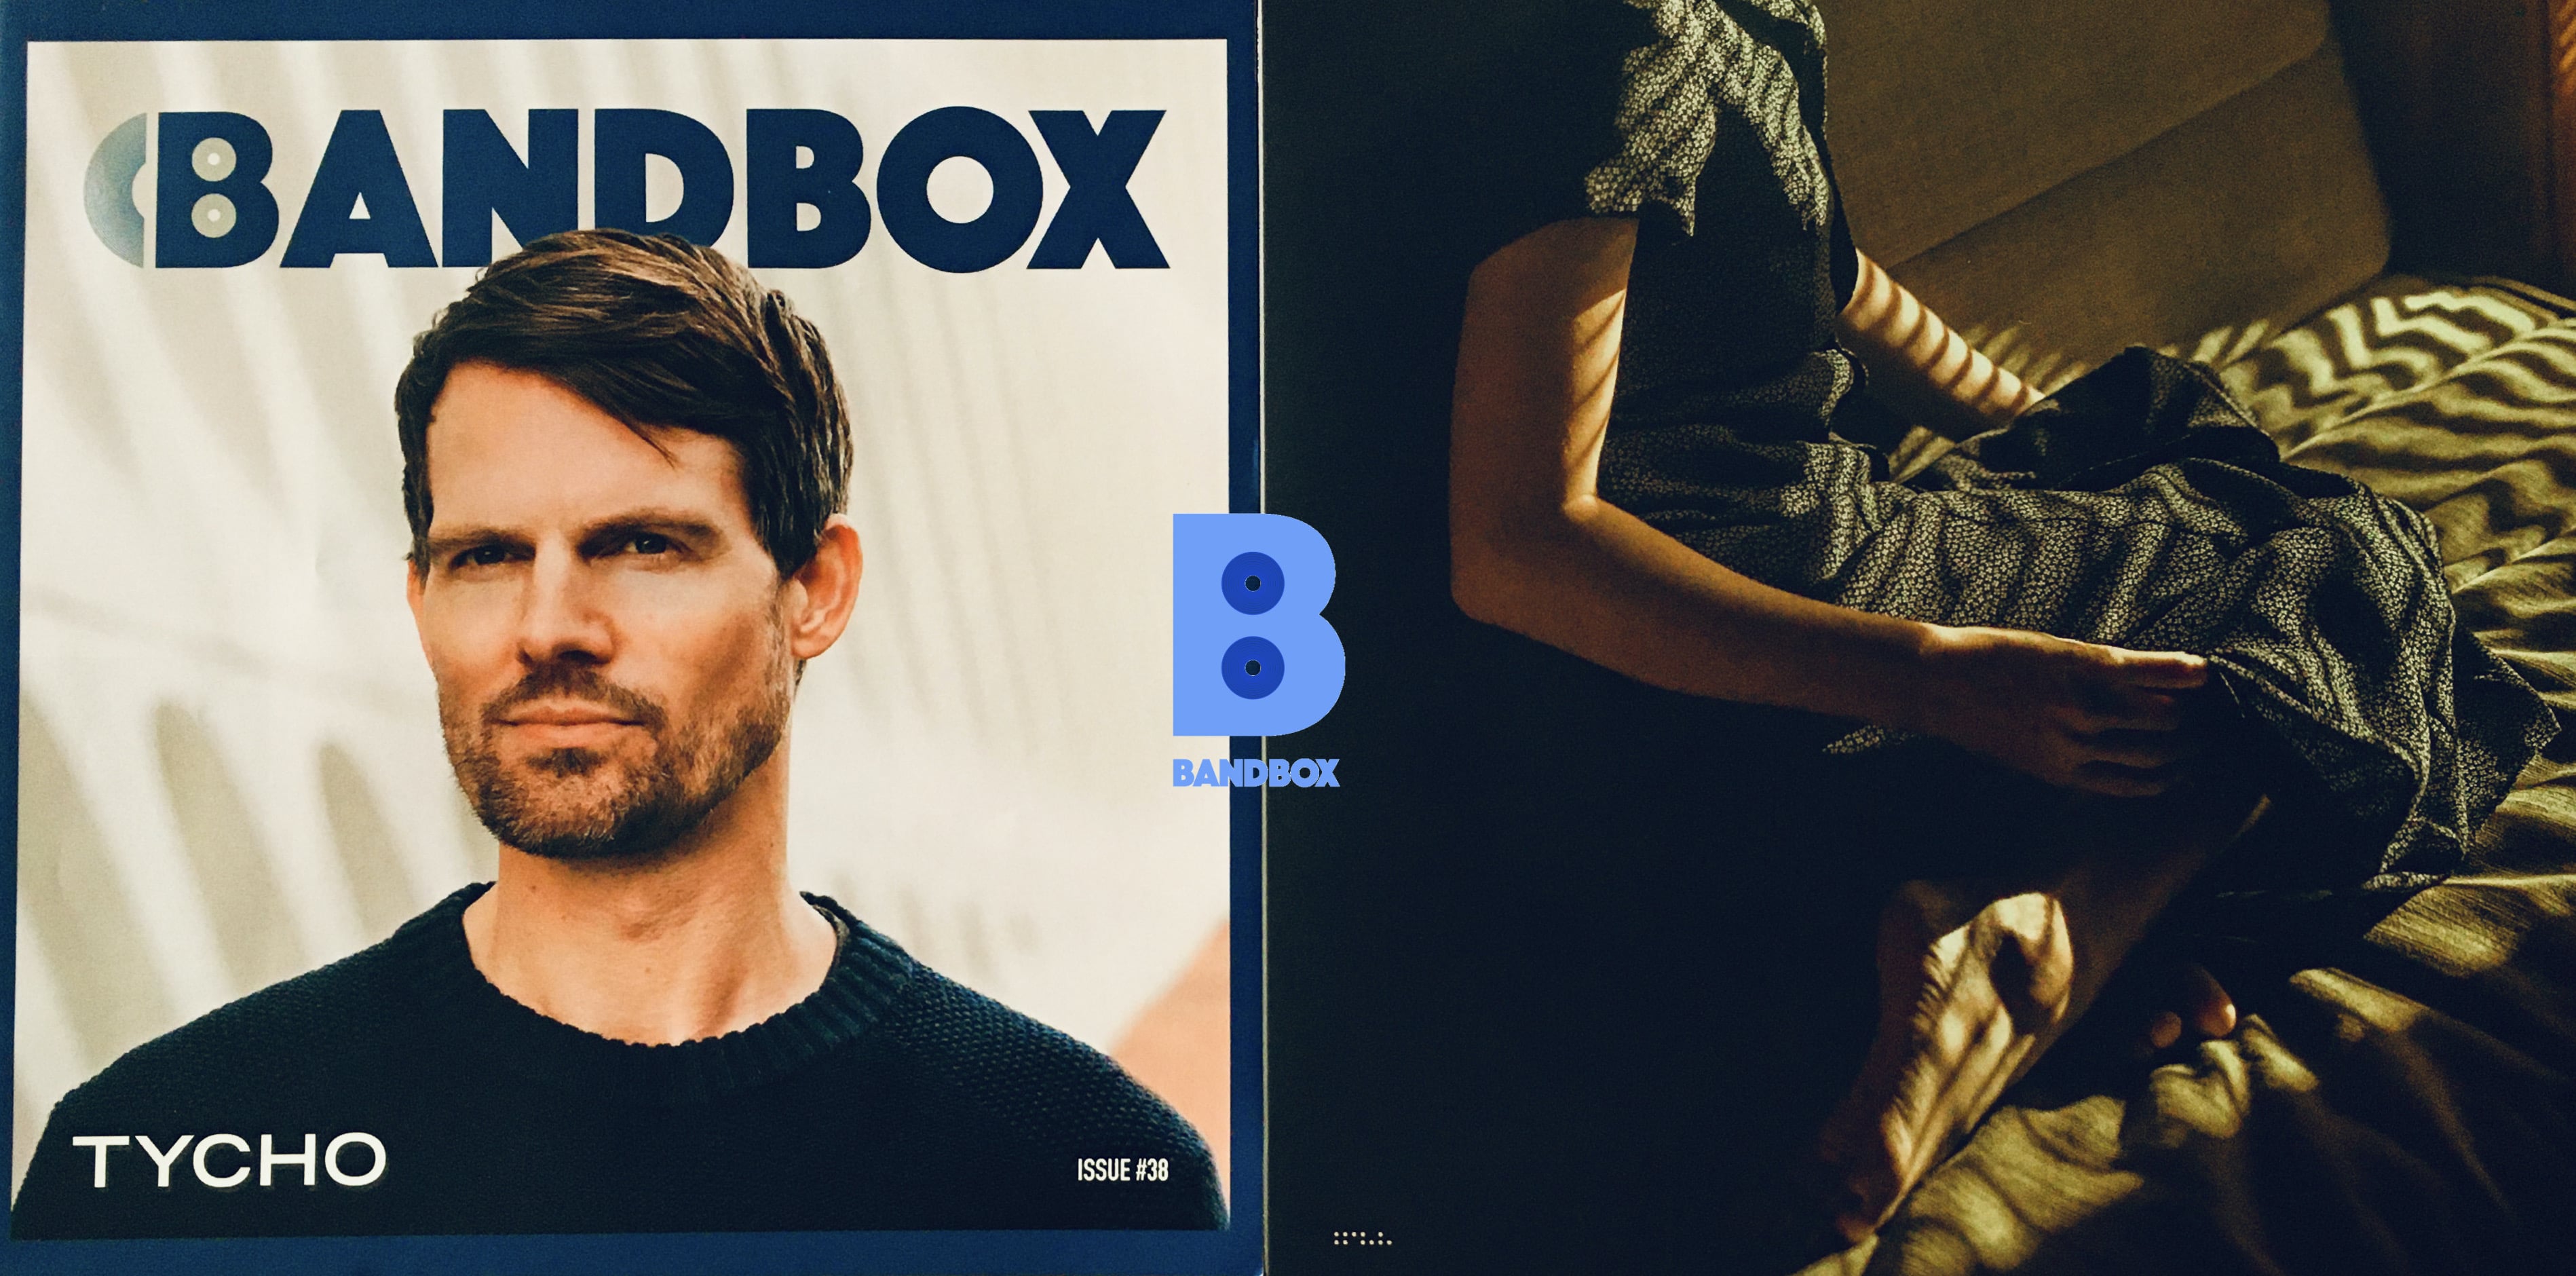 Geek insider, geekinsider, geekinsider. Com,, bandbox unboxed vol. 24 - tycho, entertainment